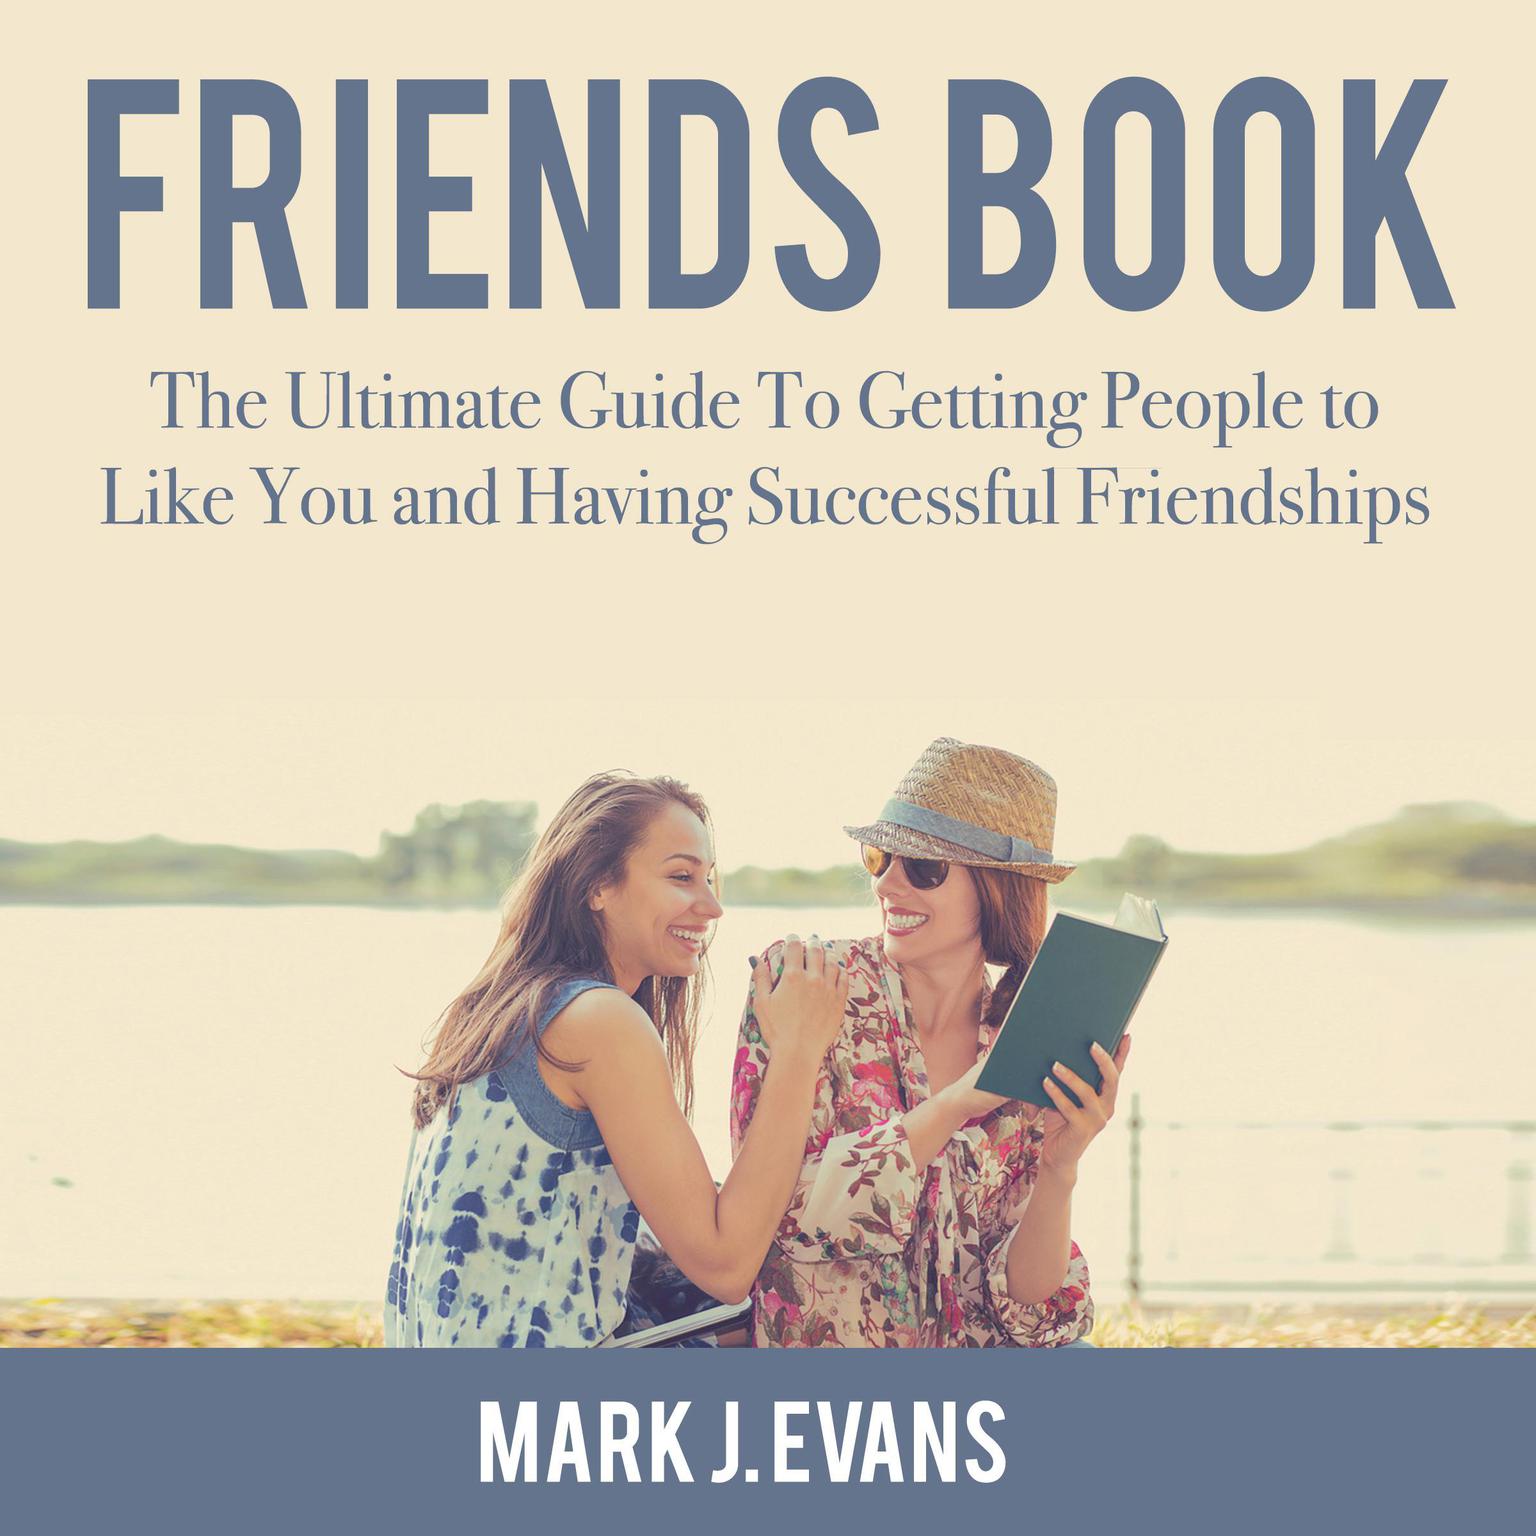 Friends Book: The Ultimate Guide To Getting People to Like You and Having Successful Friendships Audiobook, by Mark J. Evans